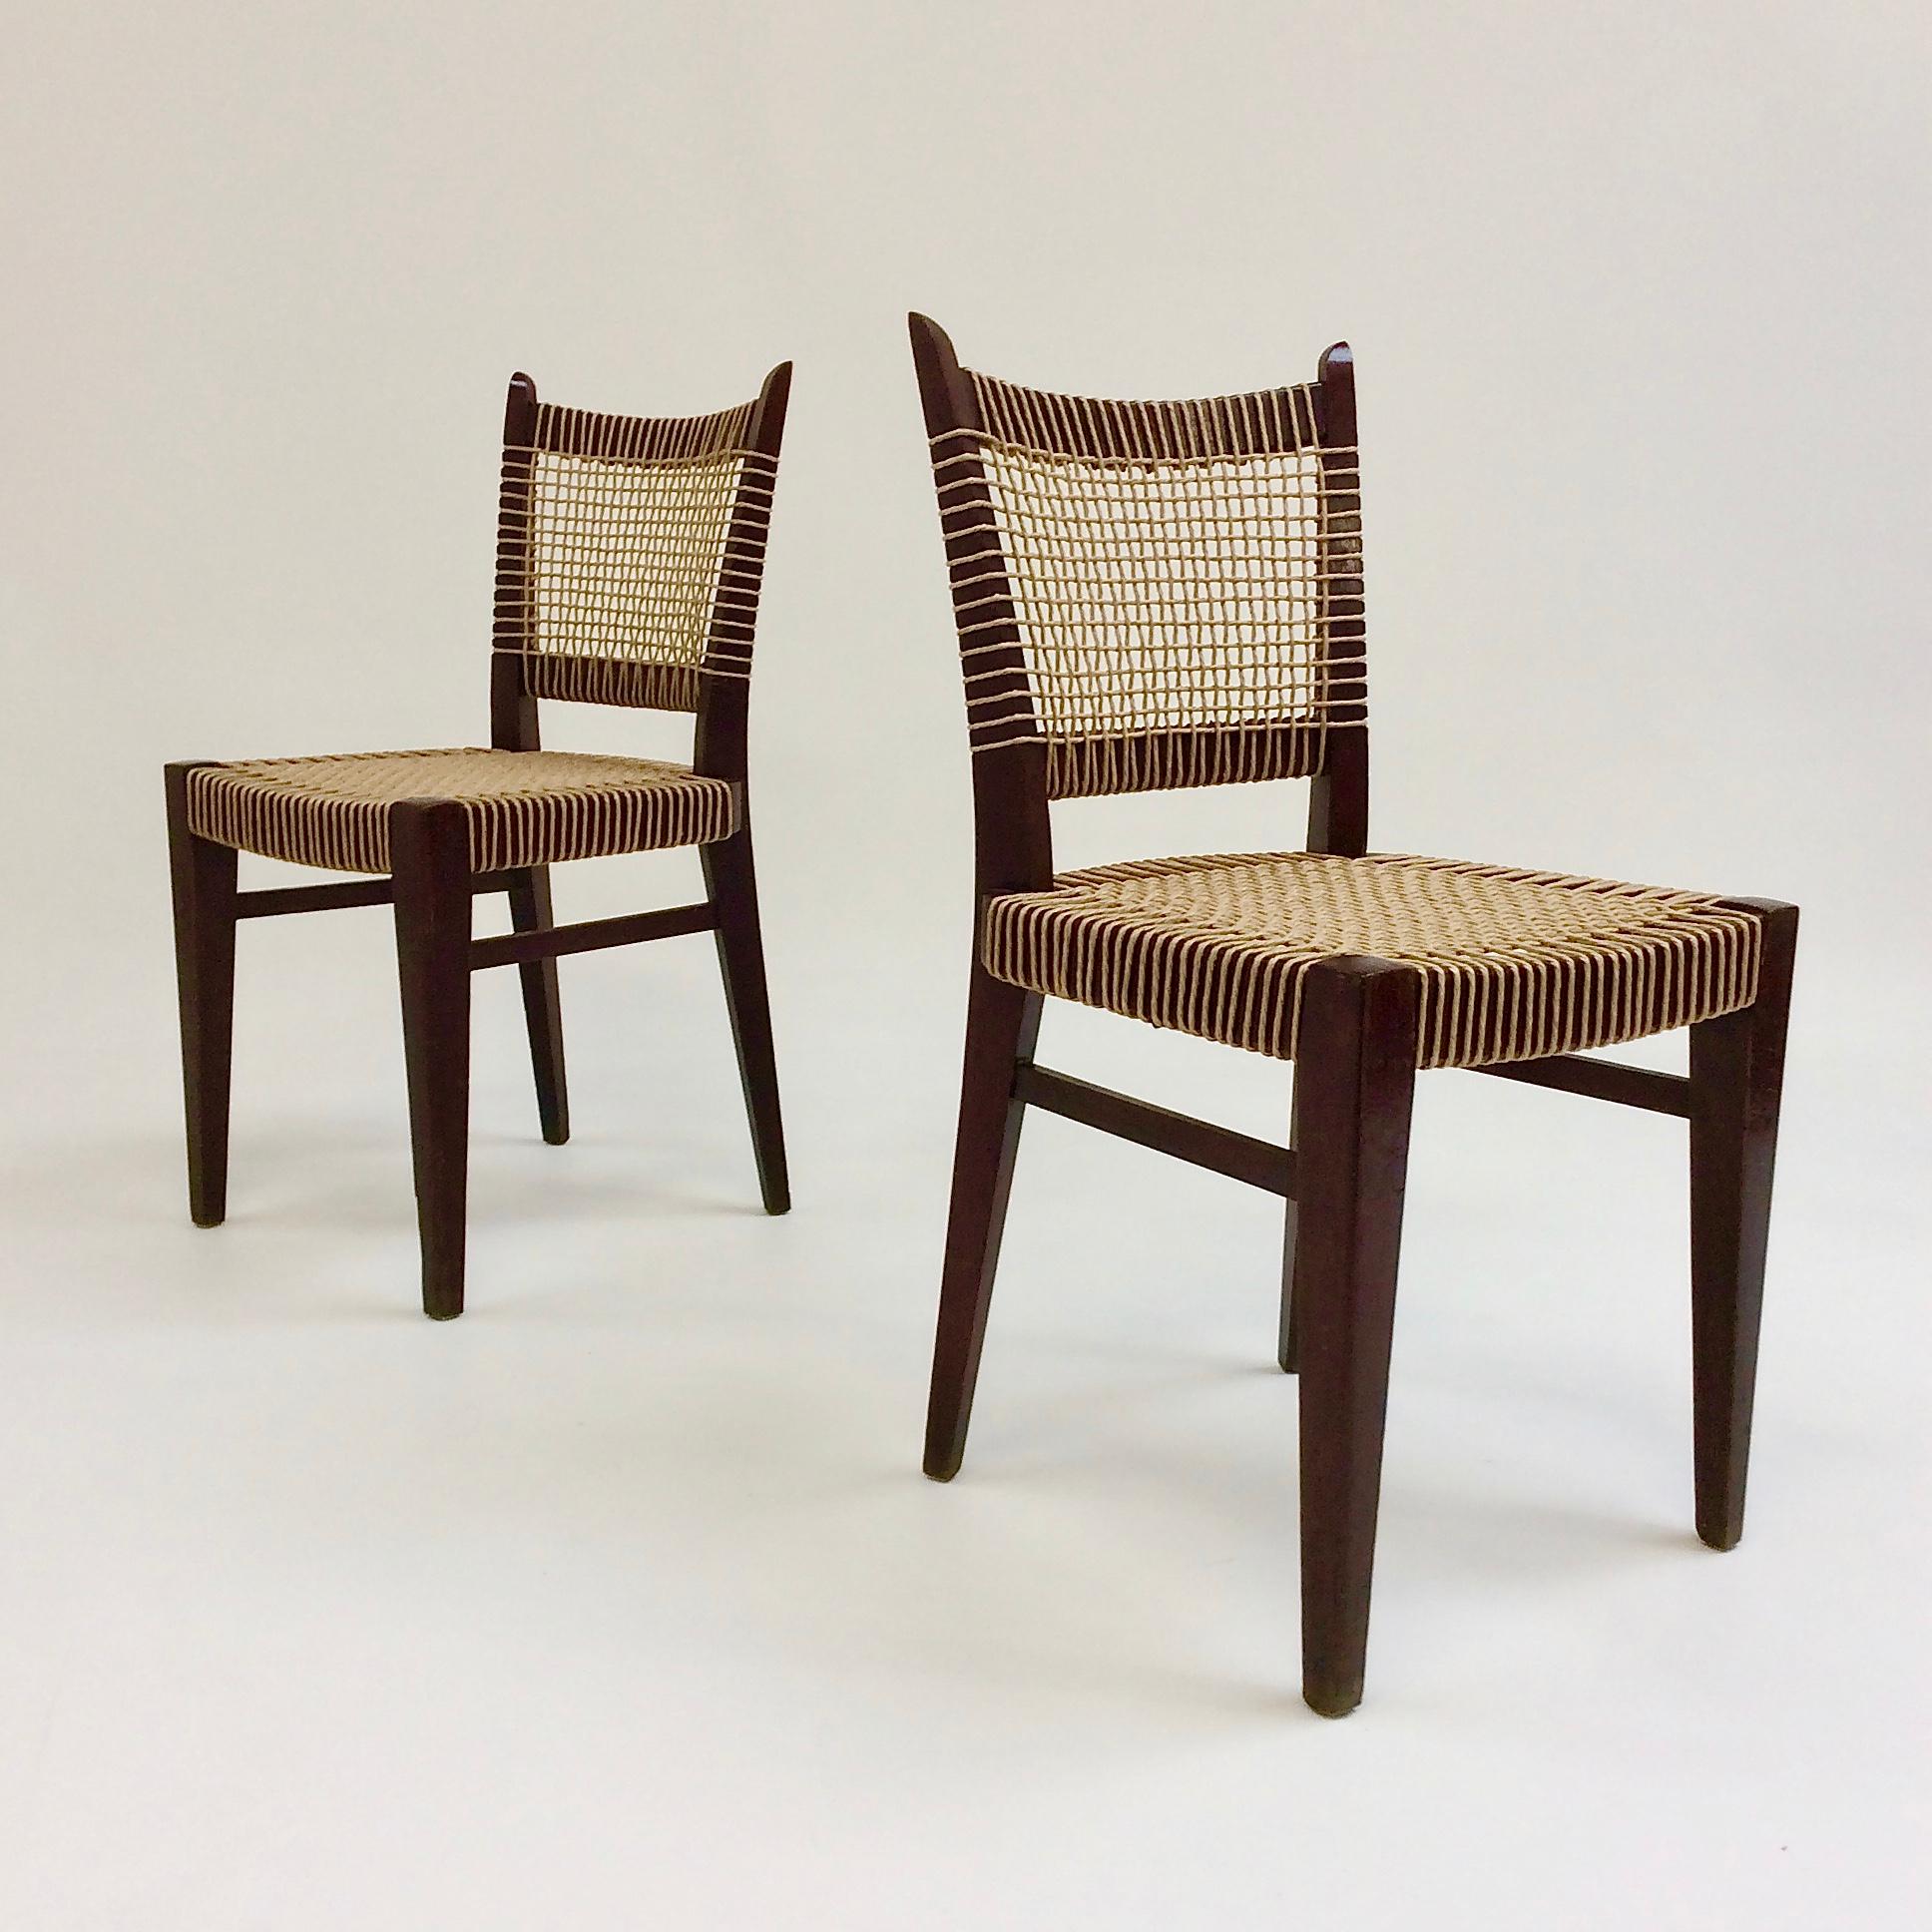 Pair of Midcentury Straw and Wood Chairs, circa 1950, France 9